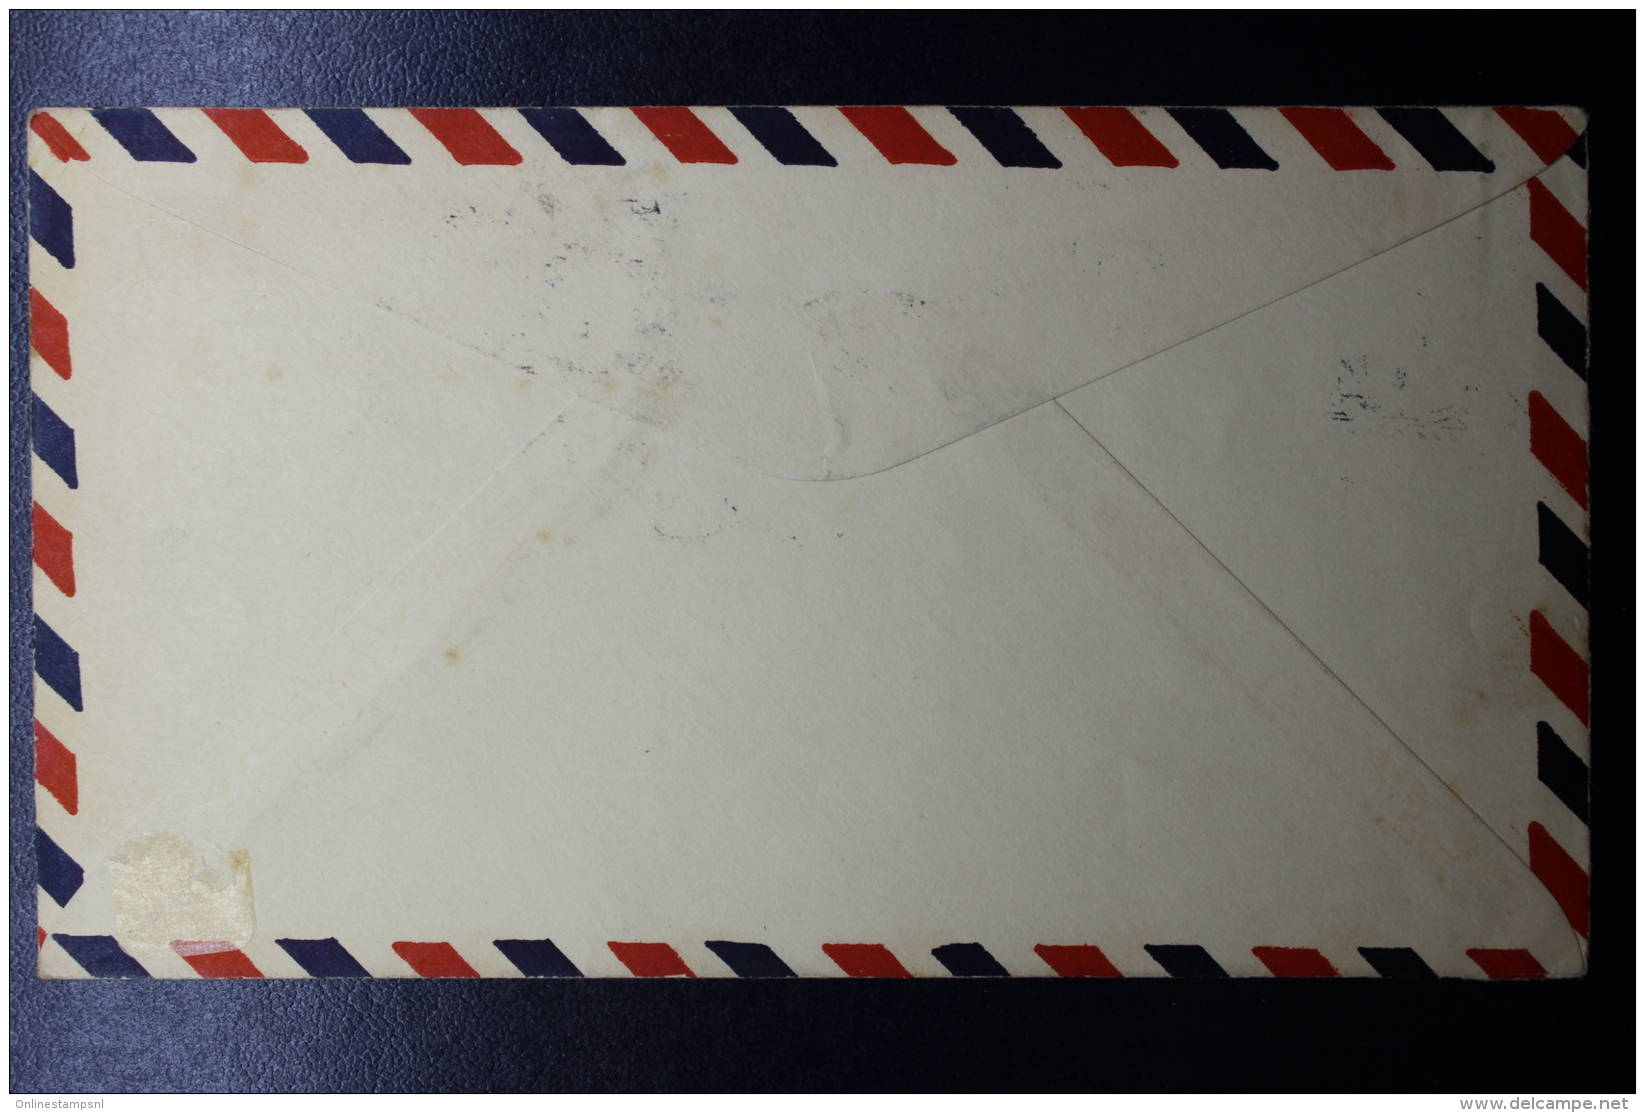 USA Tri-State Aircrat Show Chambre Of Commerce Camden April 1930 Delaware, New Jersey And Pennsylvania Signed/ Signé/sig - Covers & Documents